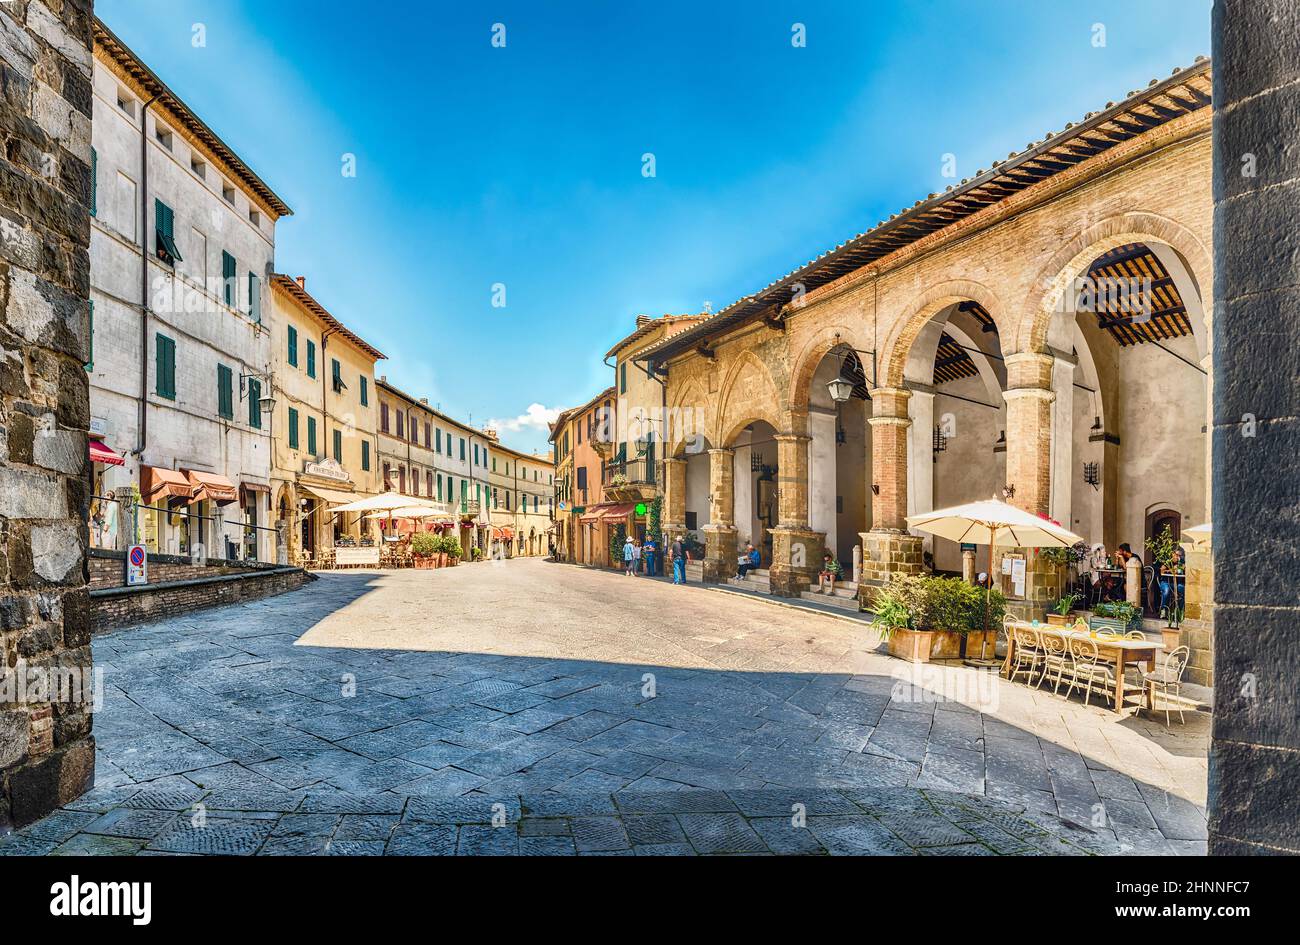 The picturesque medieval streets of Montalcino, province of Siena, Italy Stock Photo